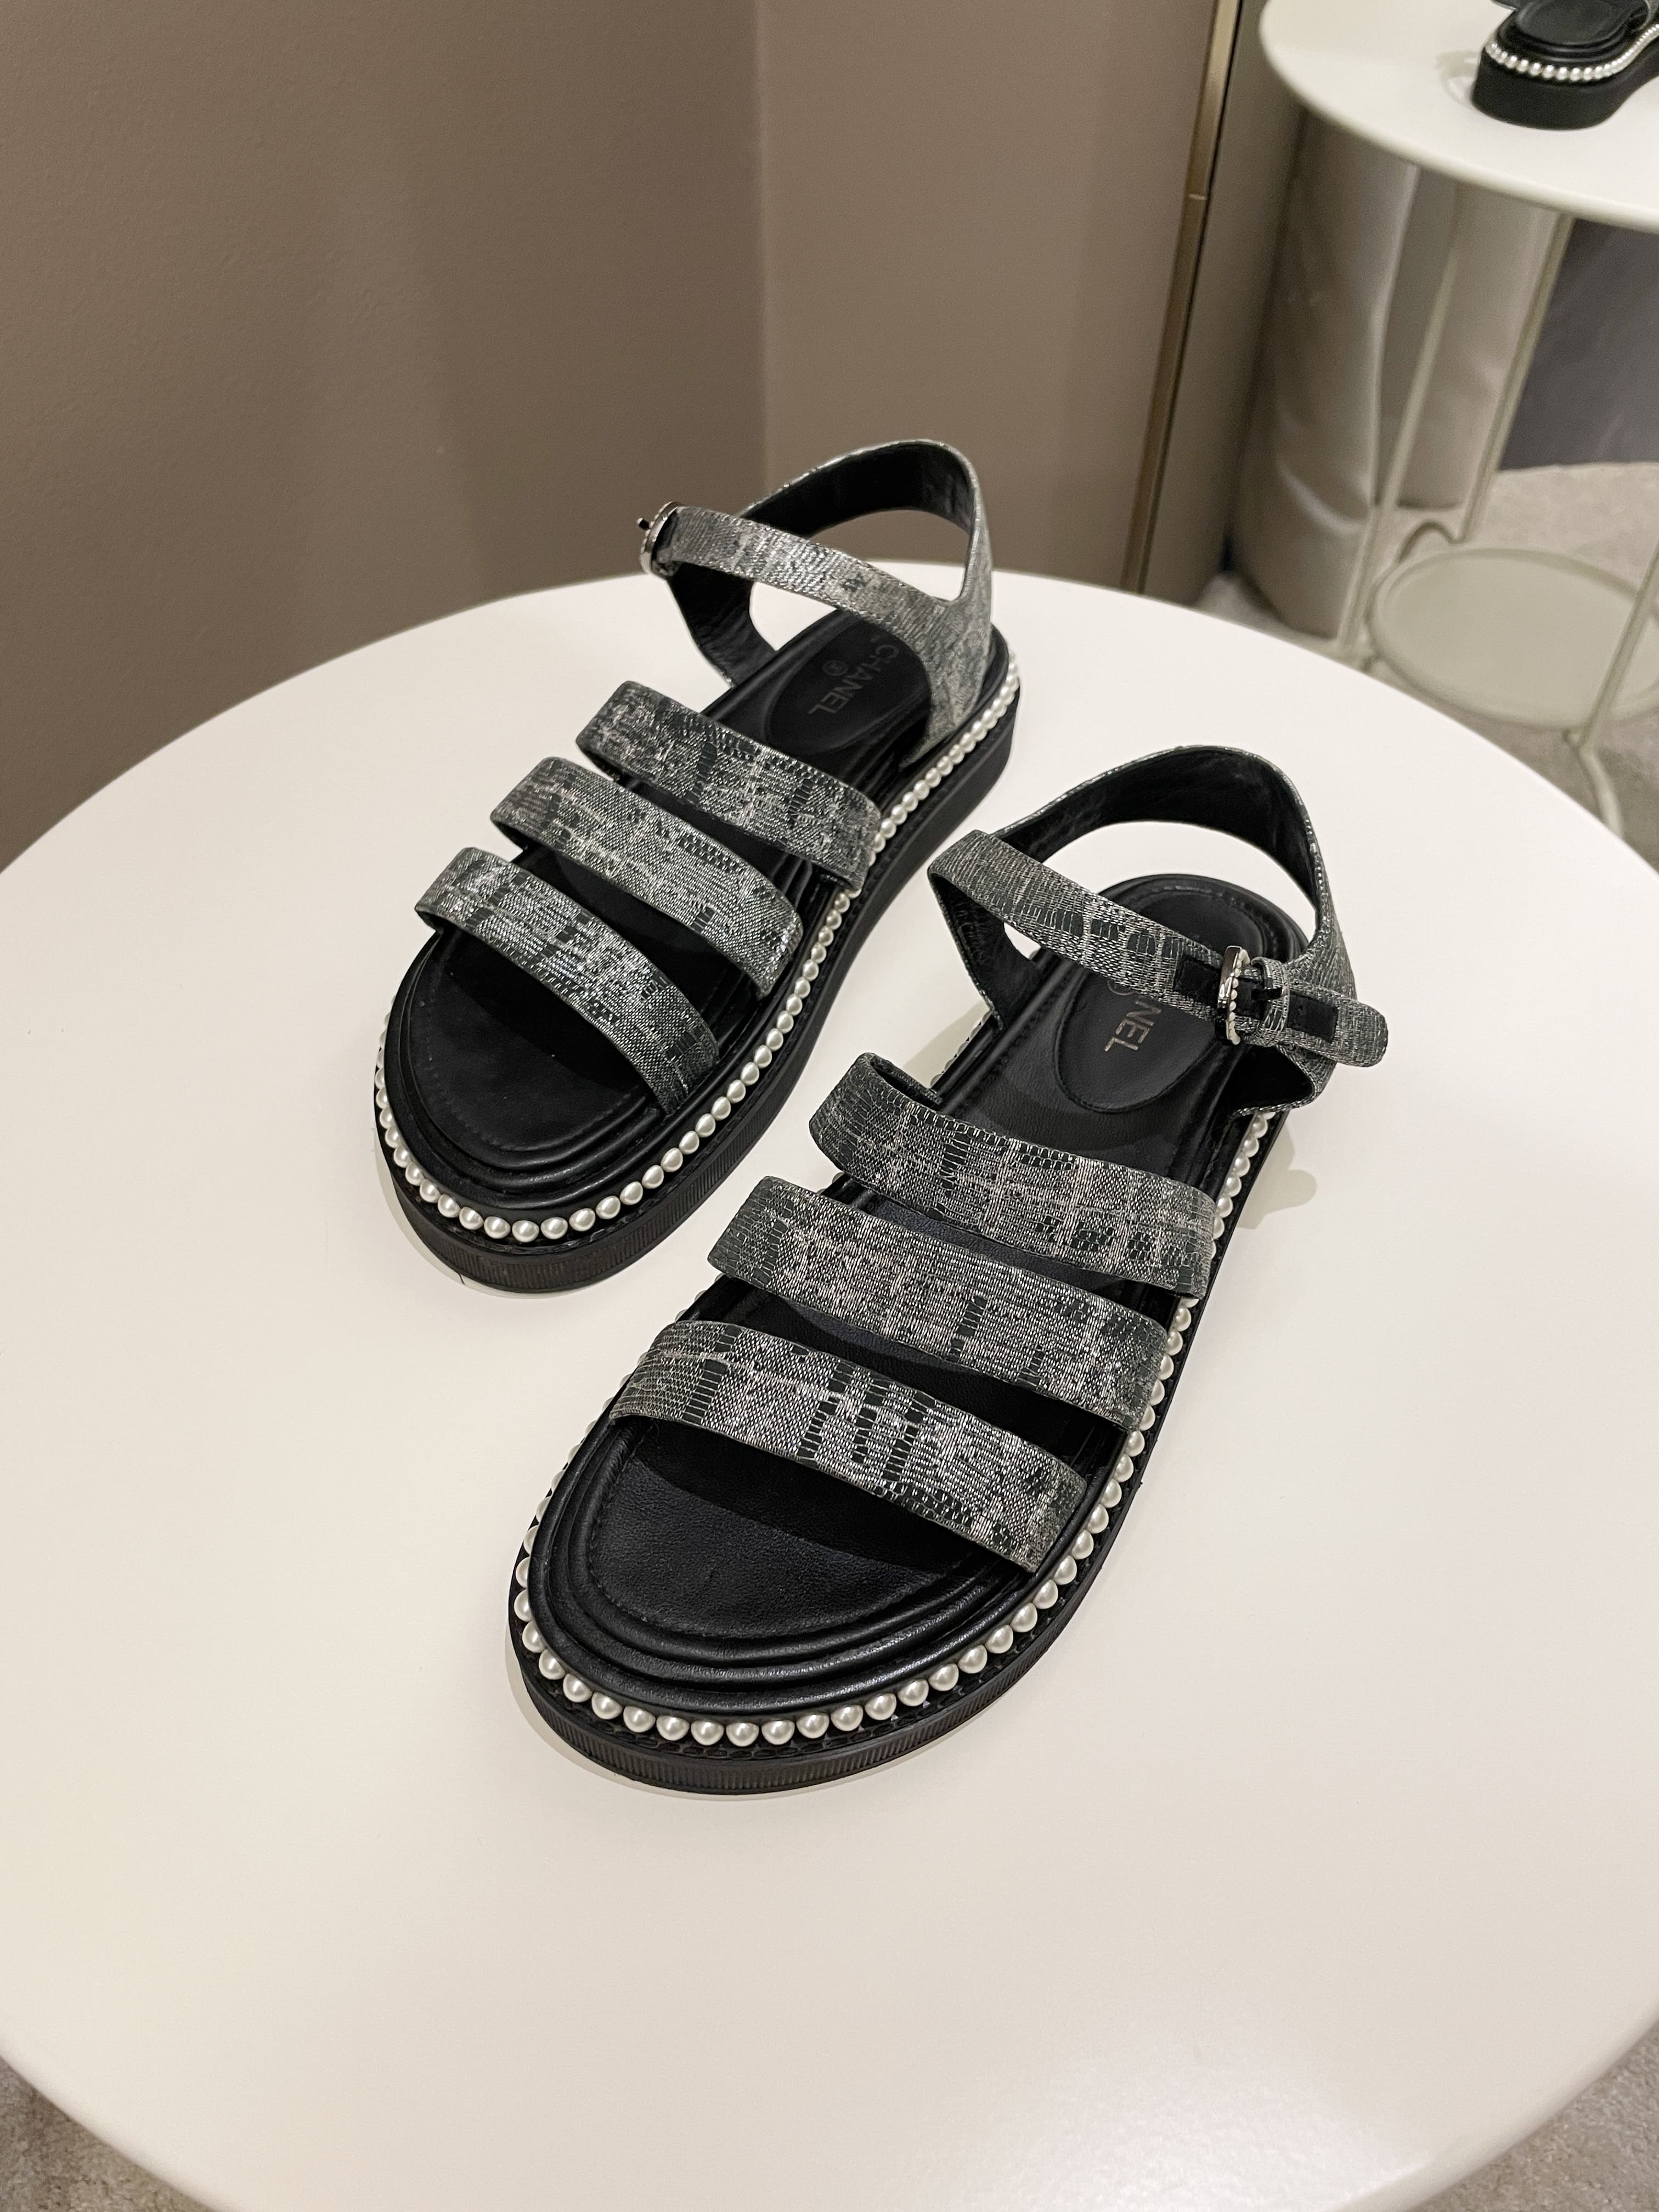 Chanel Strapy Pearl Sandals Black / Grey Size 36.5 C